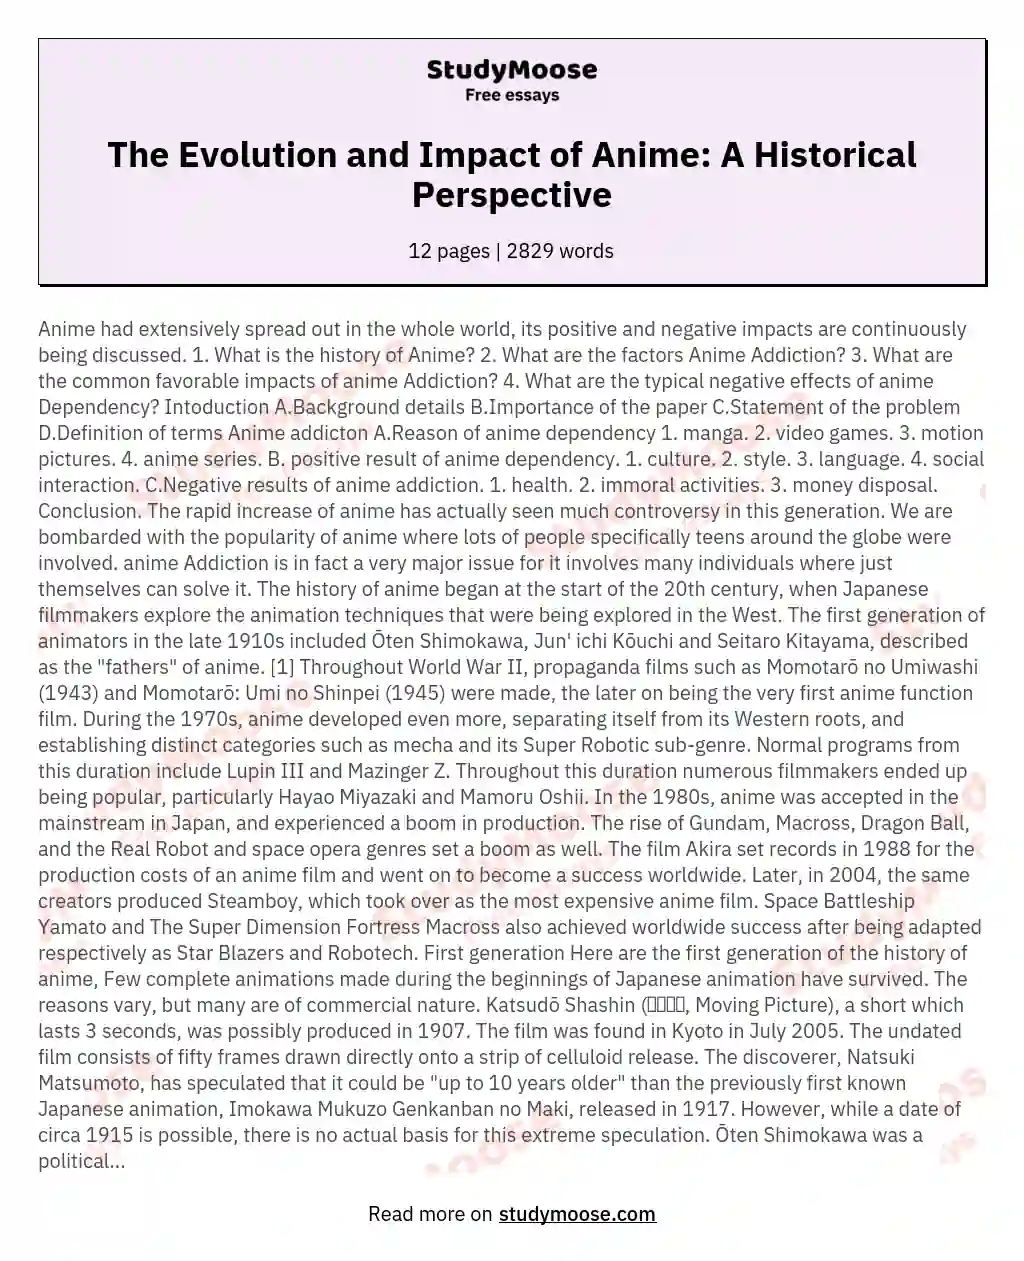 anime addiction research paper